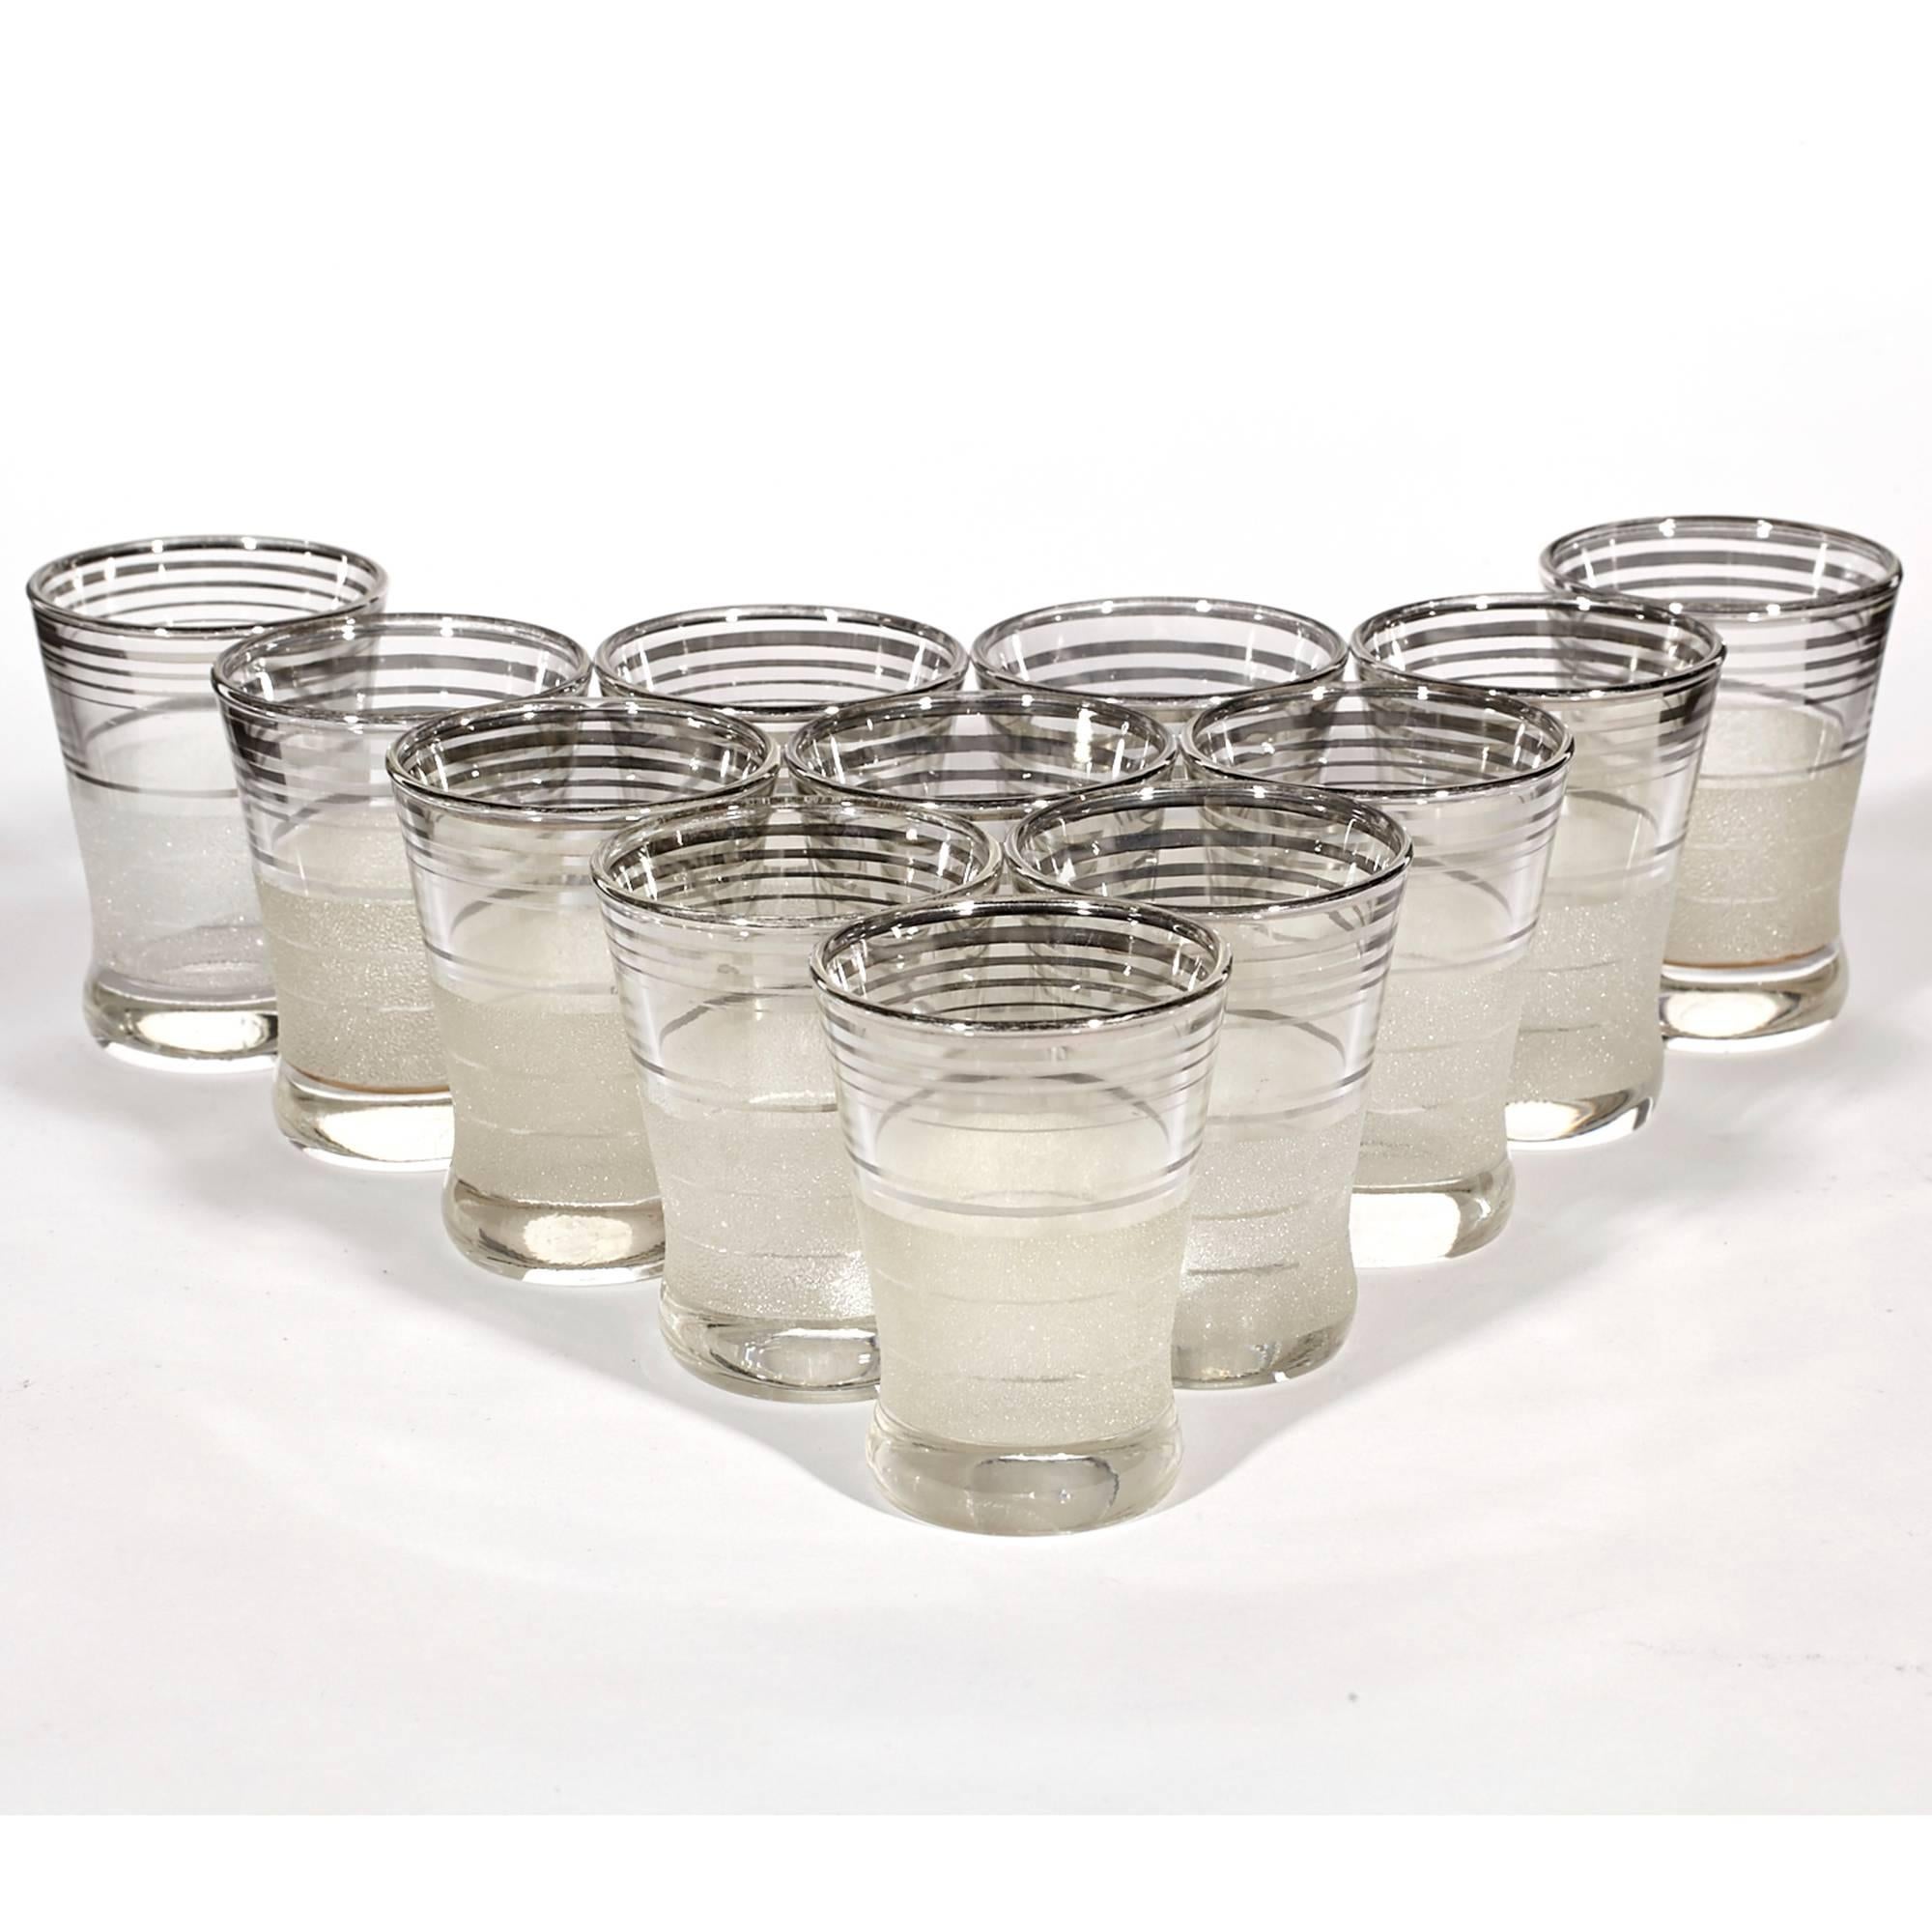 Vintage Art Deco set of 12 textured glass and multi-silver ringed liquor glasses.